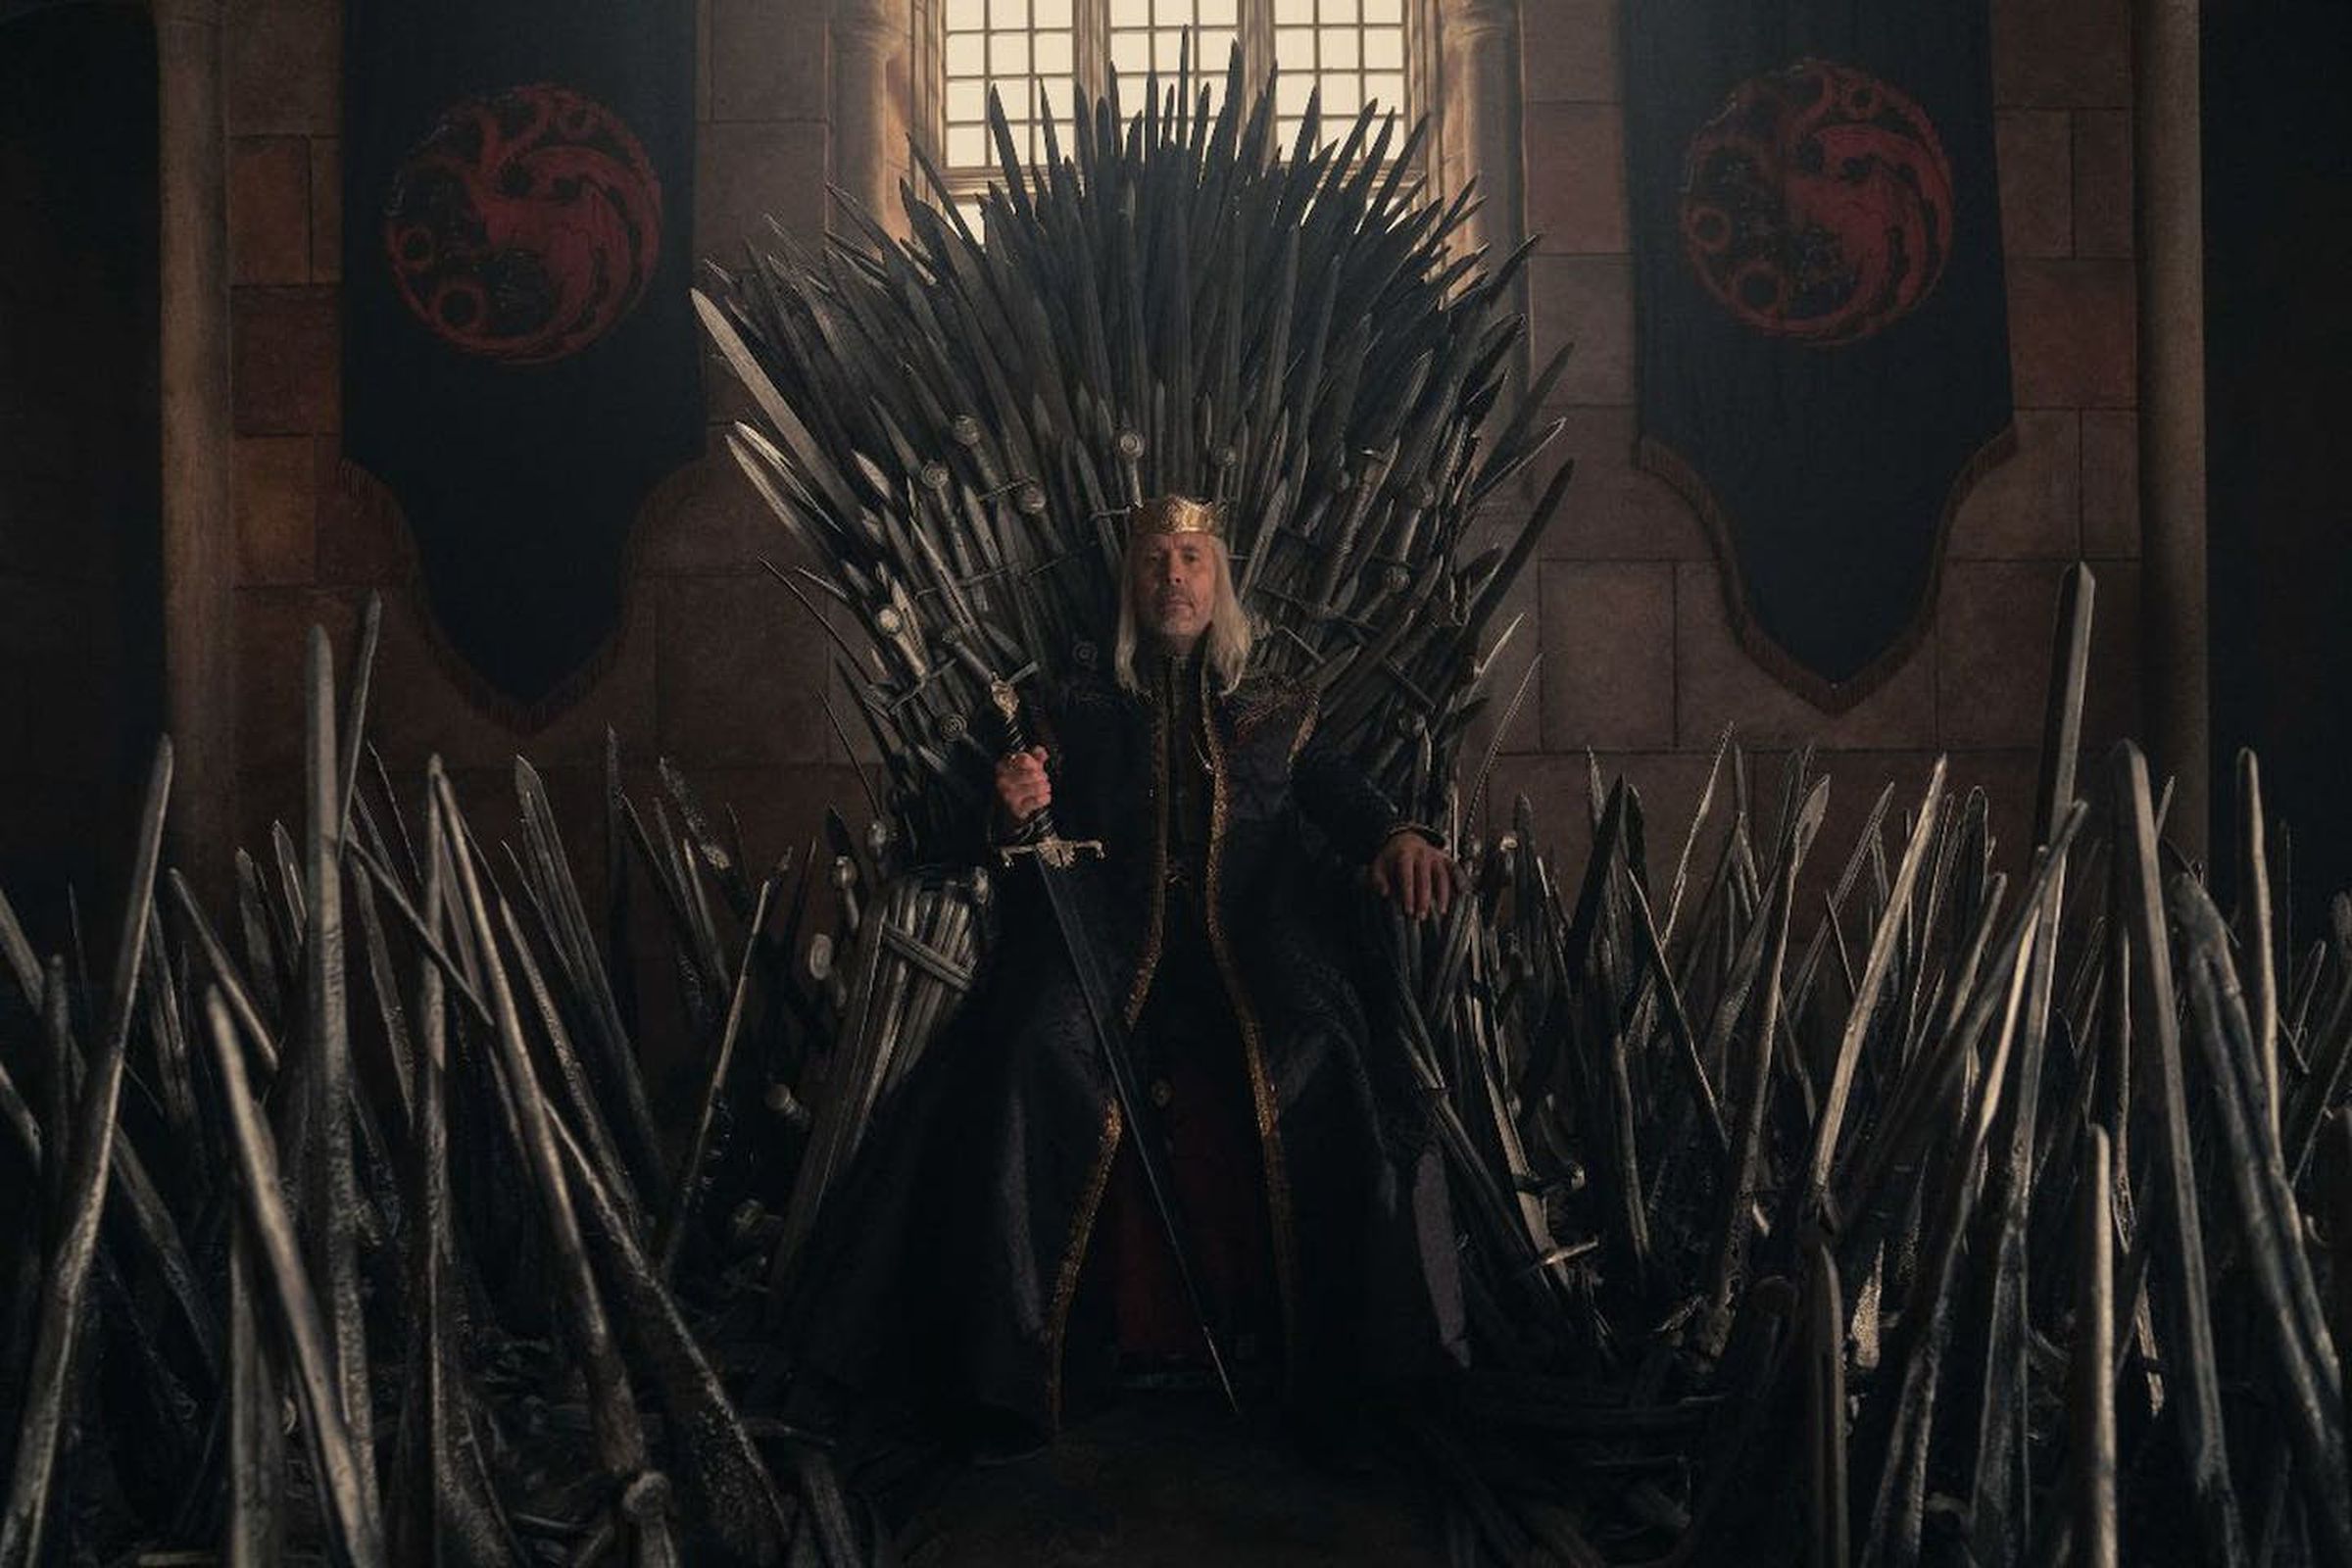 A character from the House of the Dragon sits on the Iron Throne.